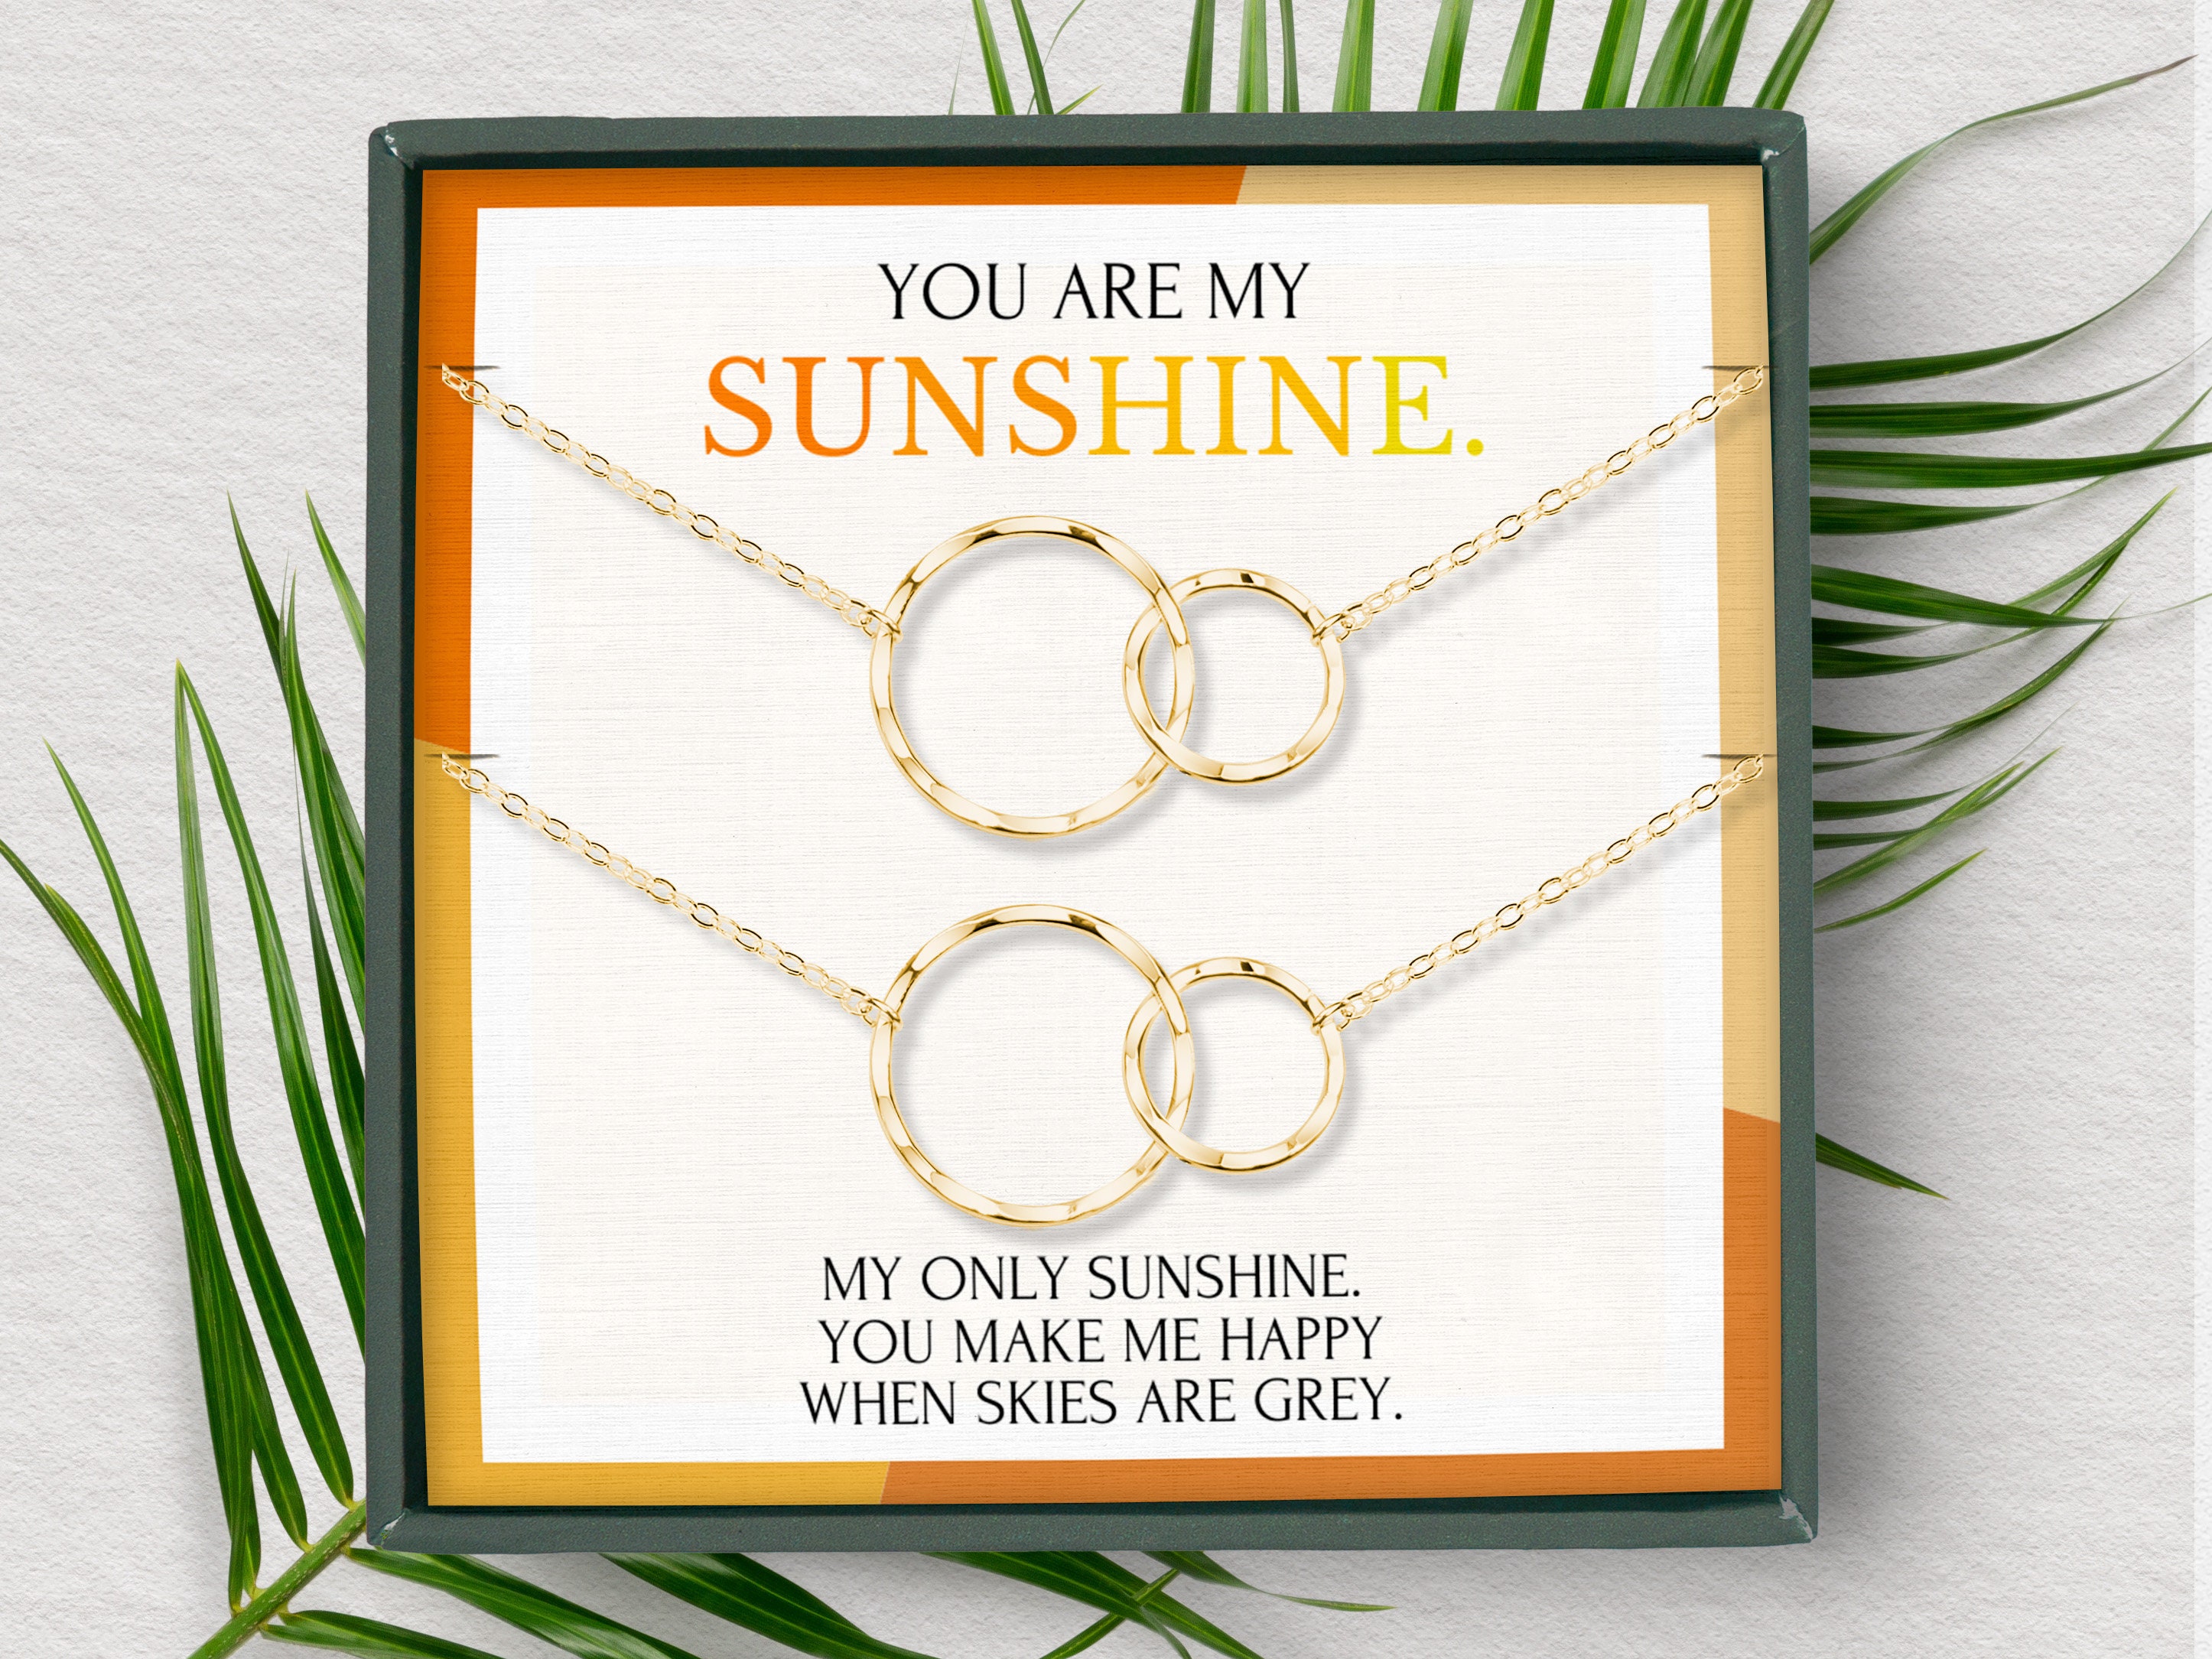 You are my sunshine Vintage Creative Sunflower pendant Double-layer Open  Necklace Sweater Necklaces for Women Jewelry Gift